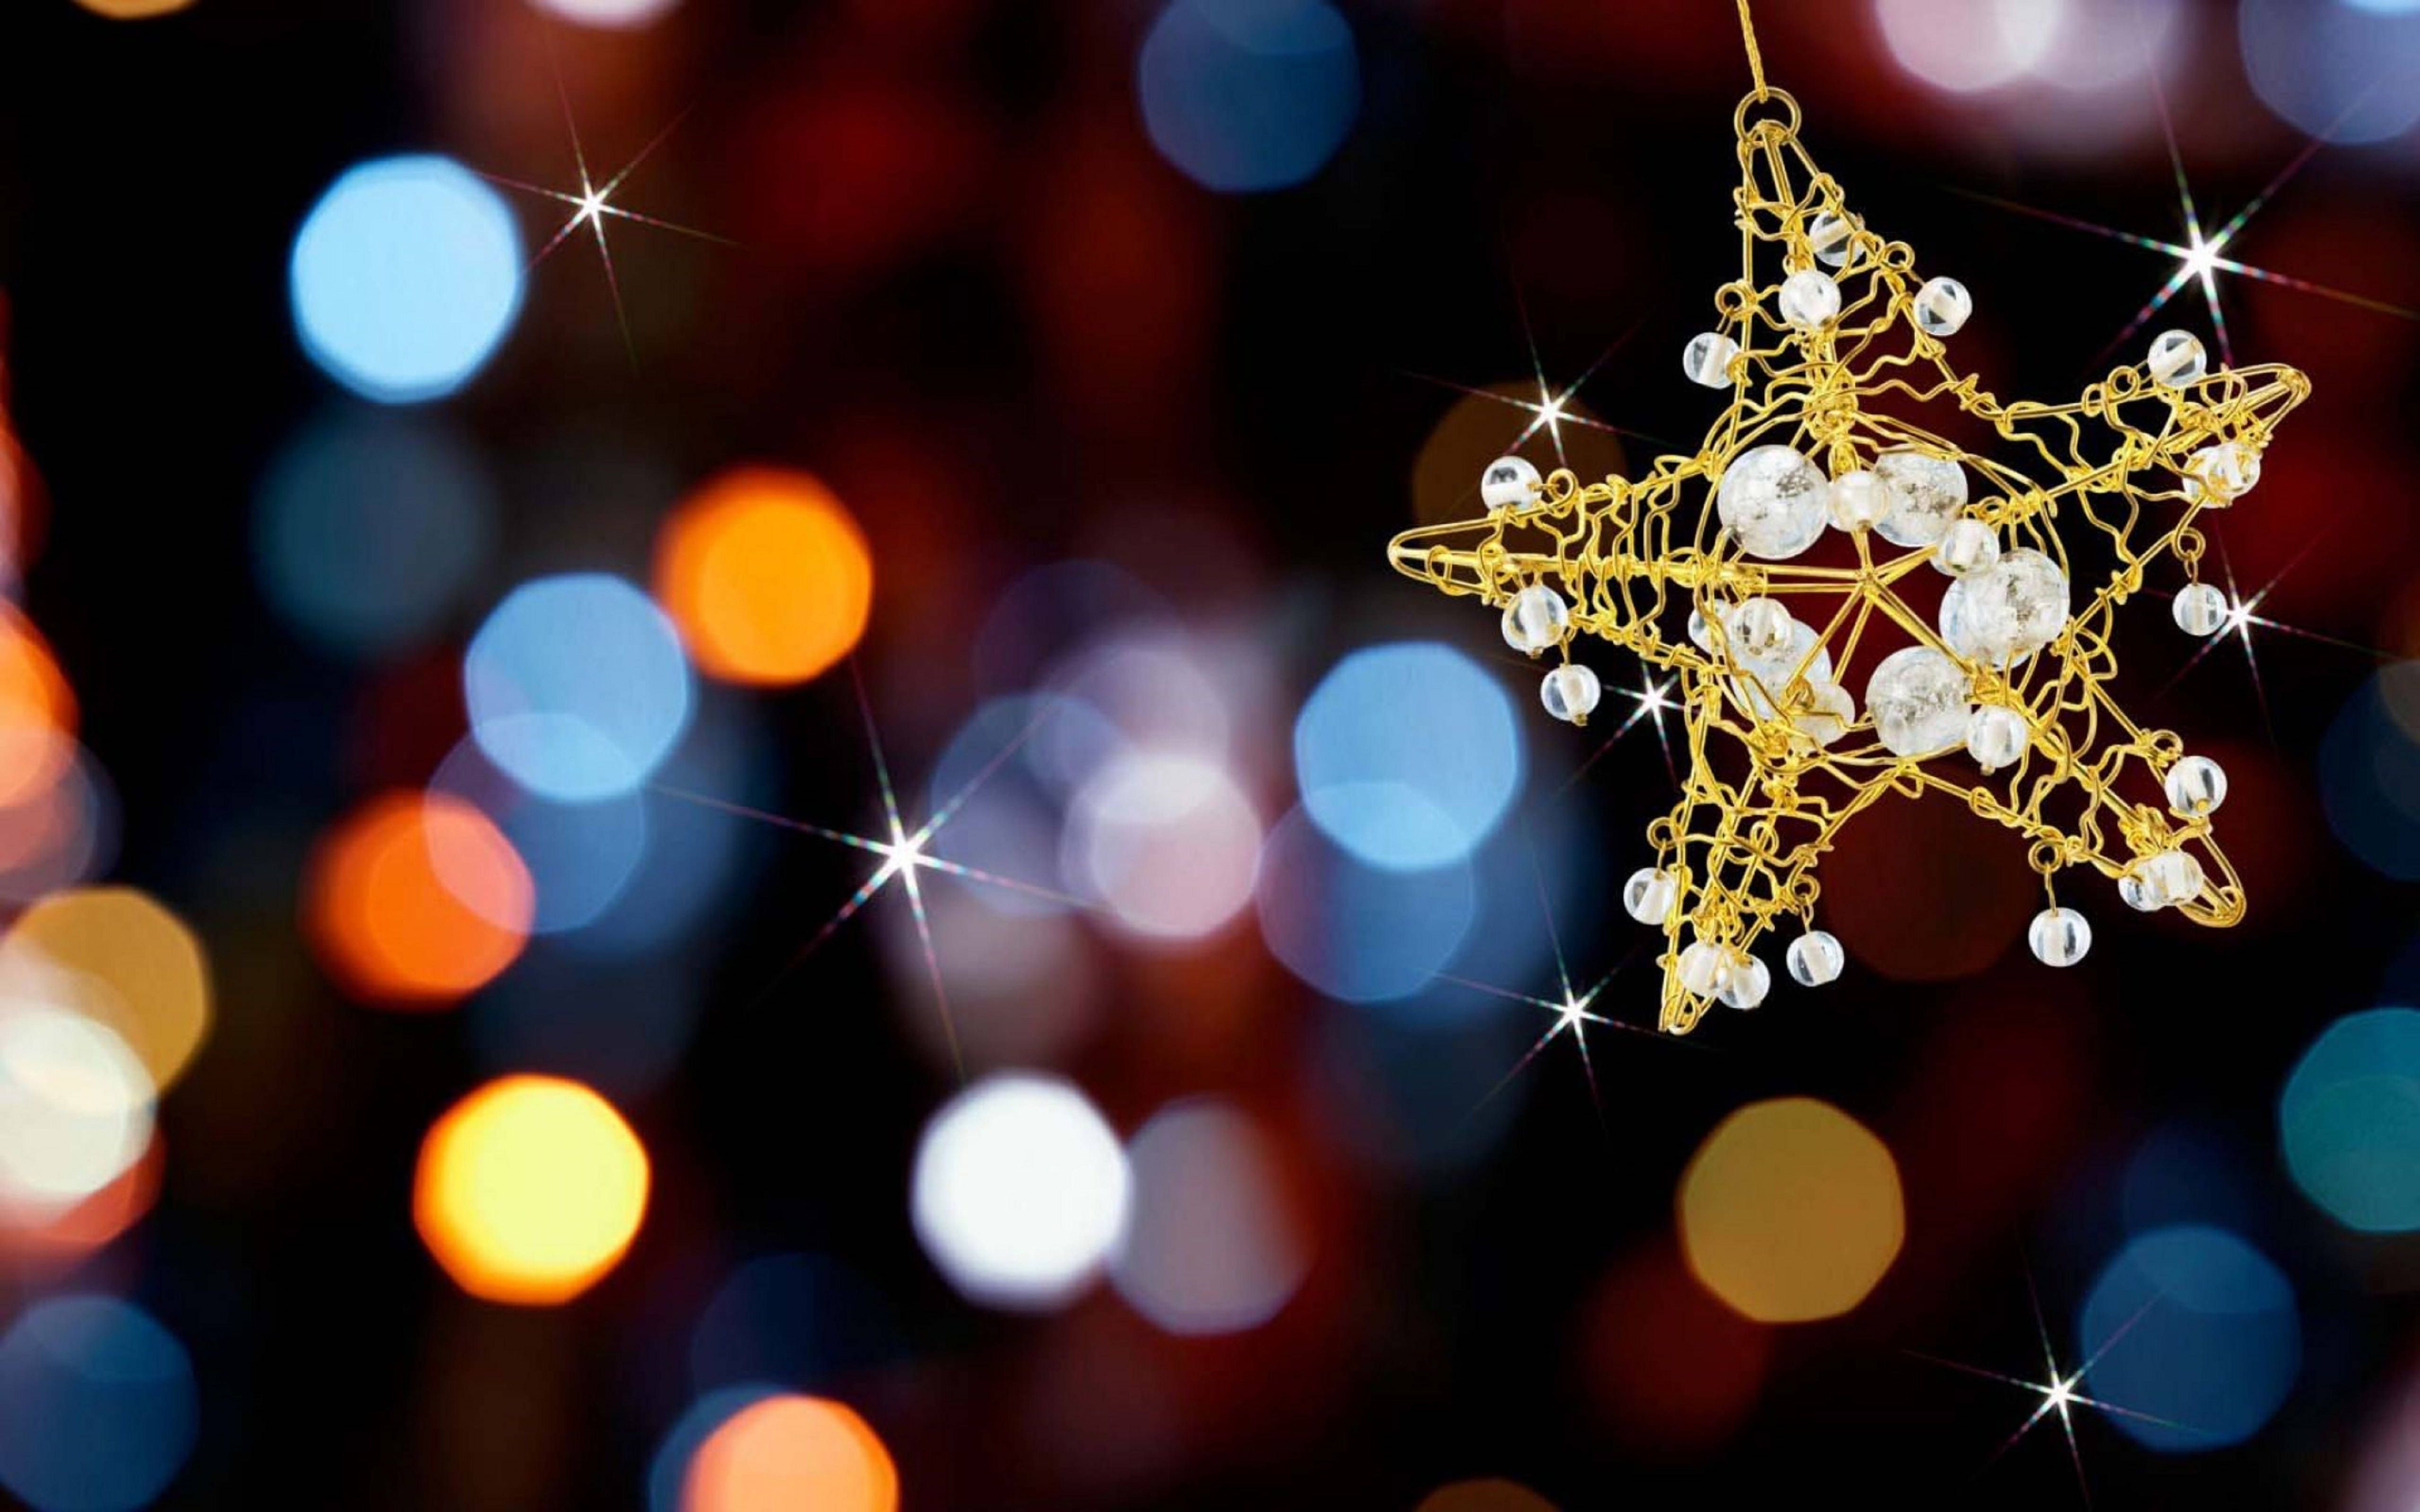 A golden star ornament with small white beads hanging from a gold string. - New Year